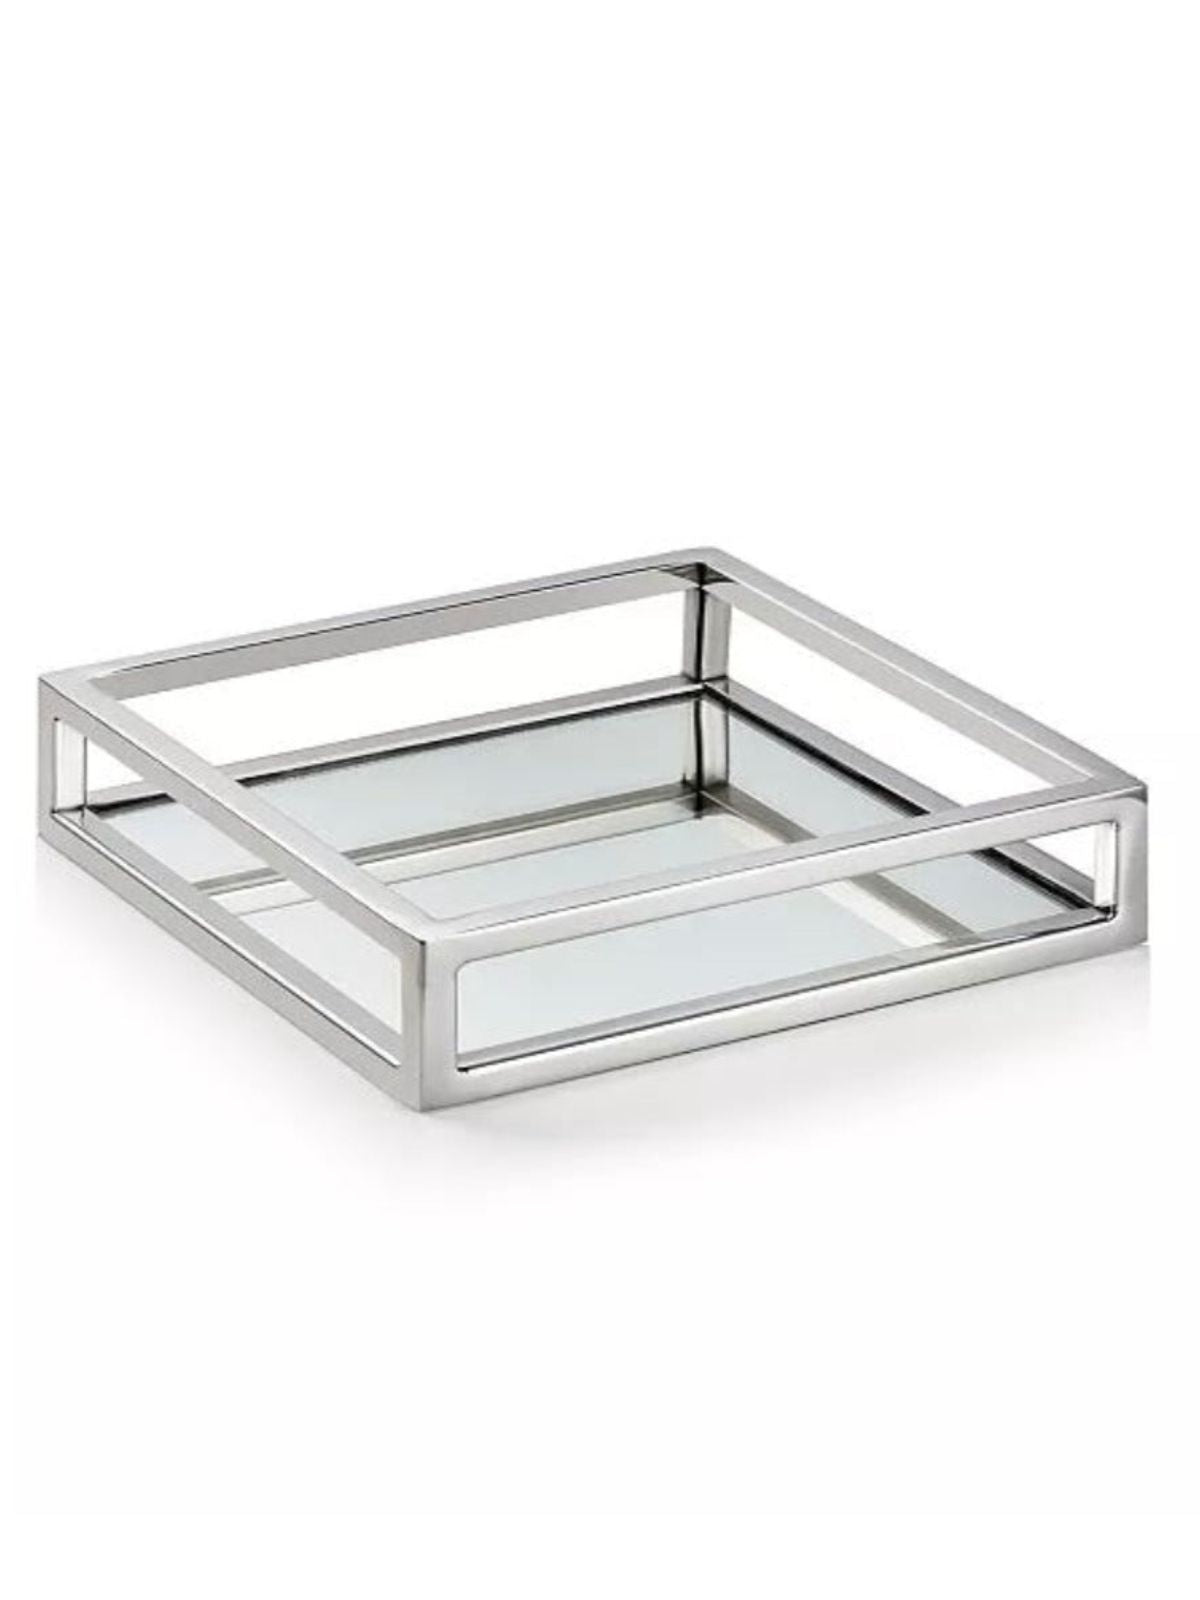 This Luxurious Chromed Finish Napkin Holder features a Mirror base and Silver Rails sold by KYA Home Decor. 